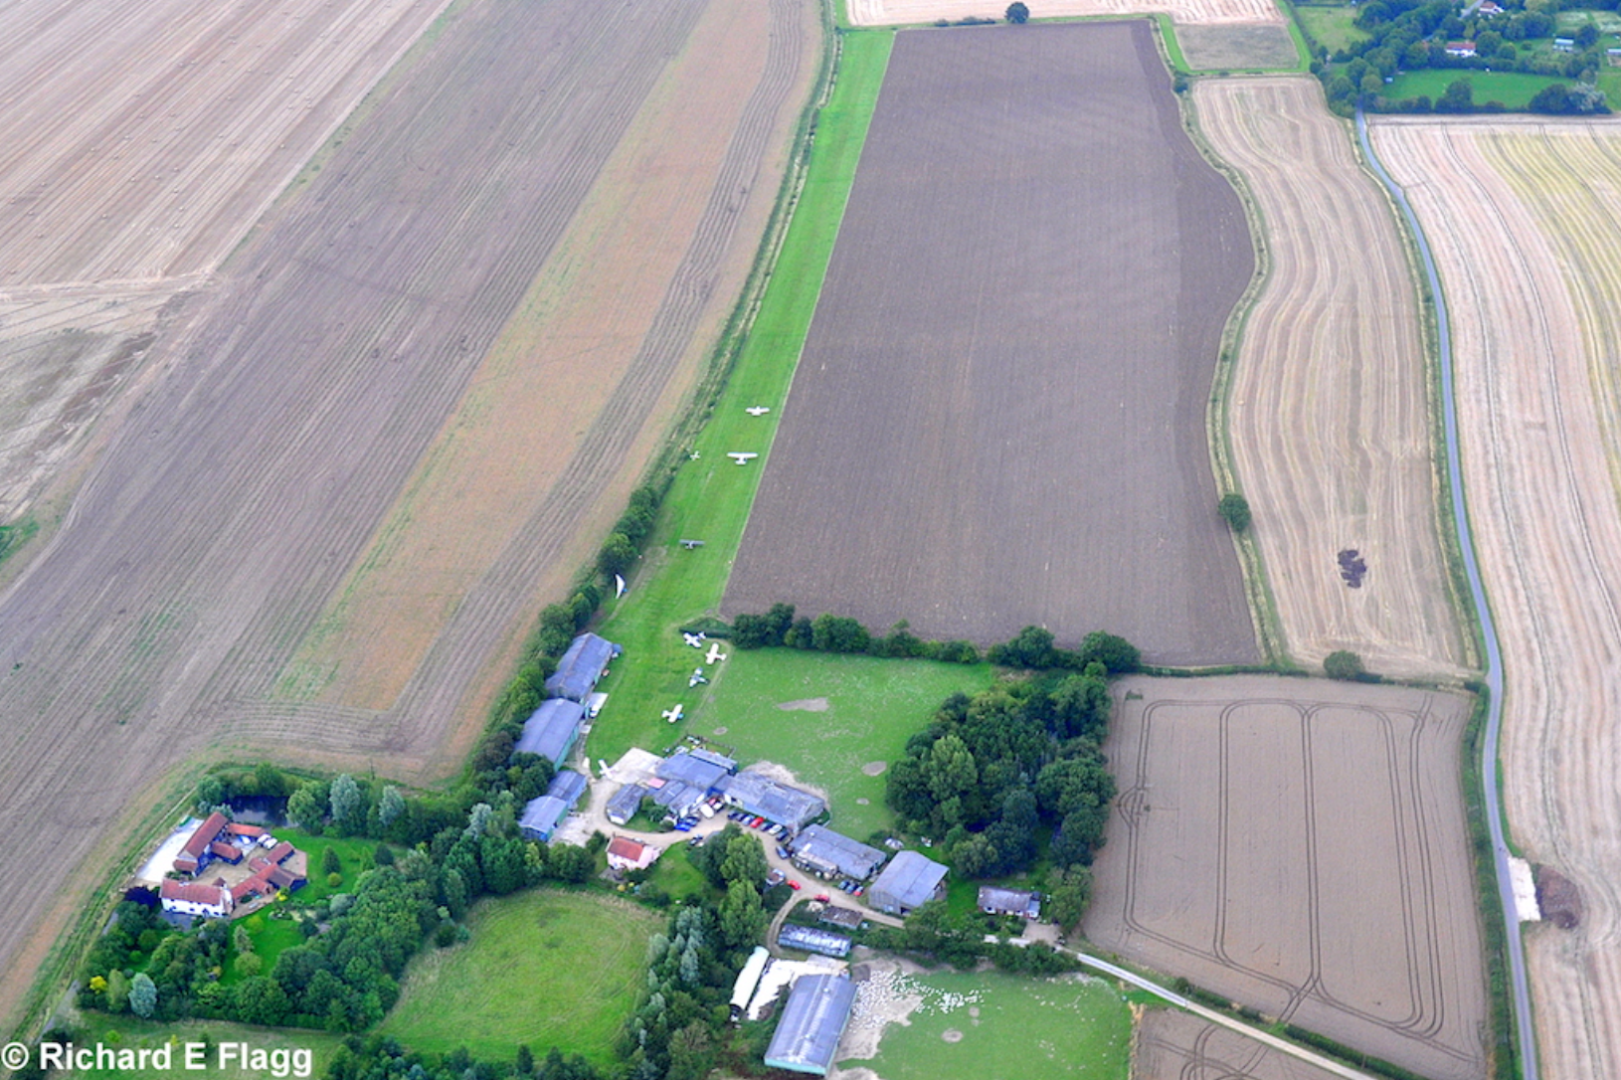 004Aerial view of Priory Farm Airfield - 5 August 2009.png